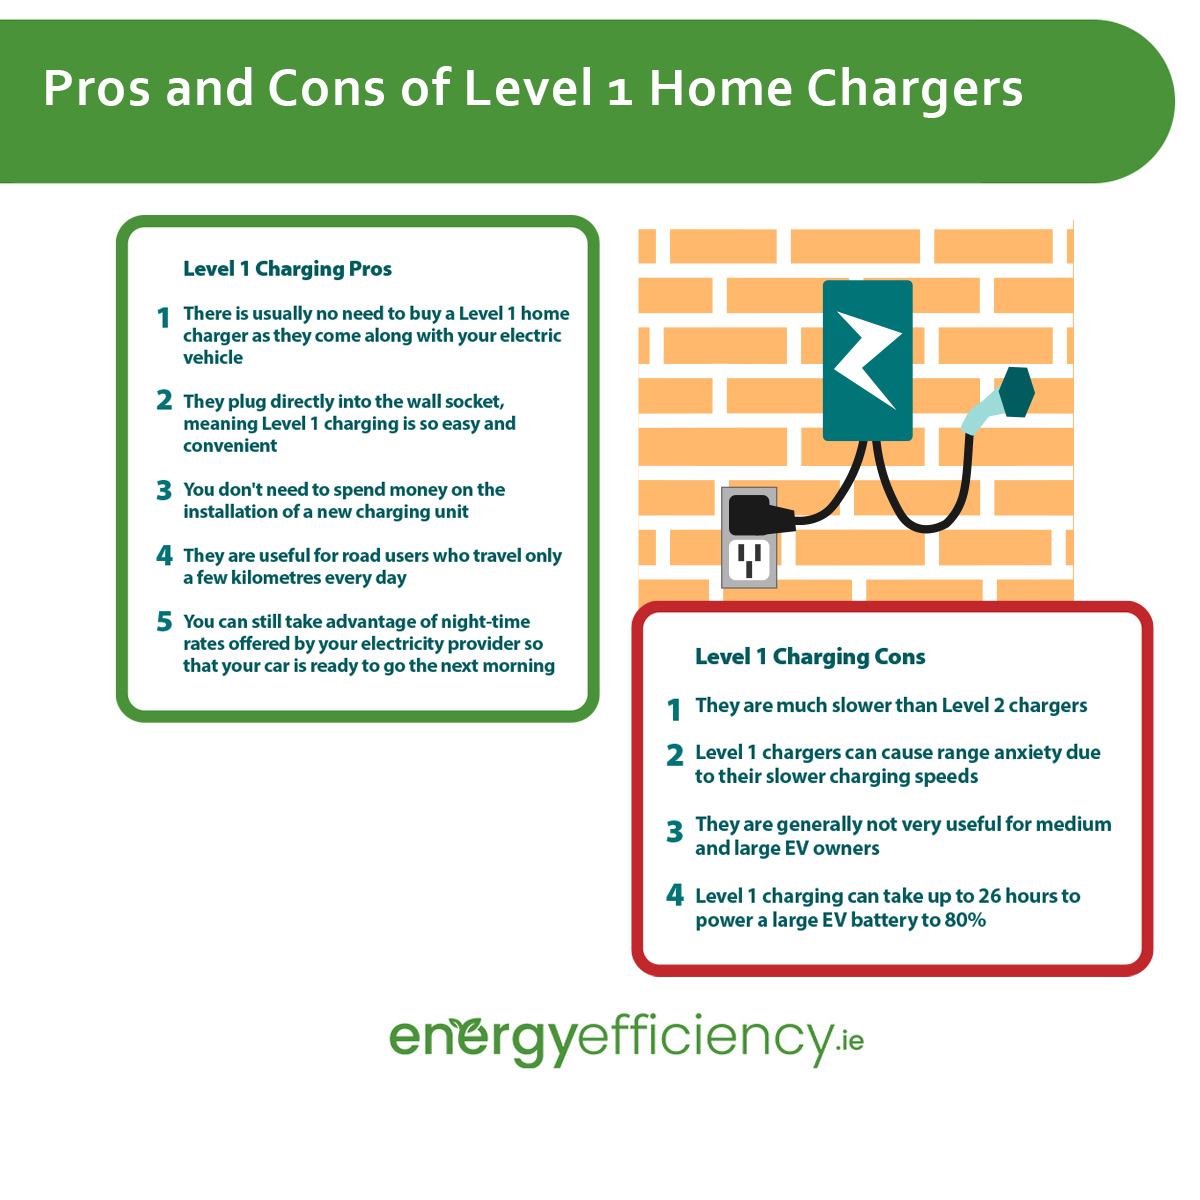 Pros and Cons of Level 1 Home Chargers